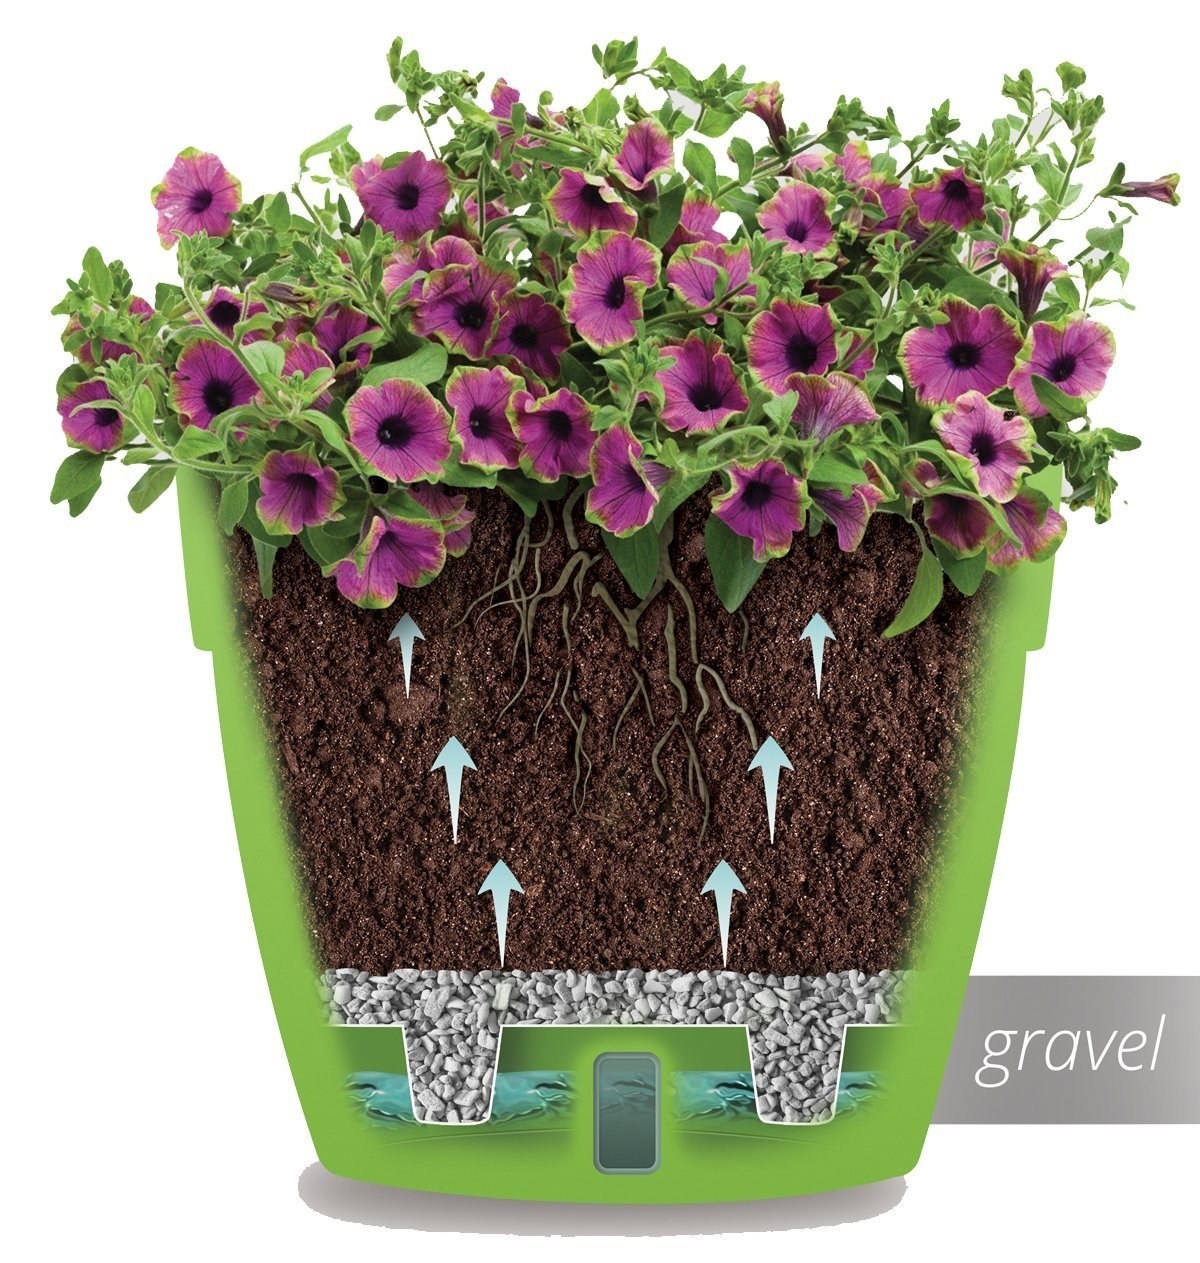 26 Insanely Useful Products All Gardeners Should Own